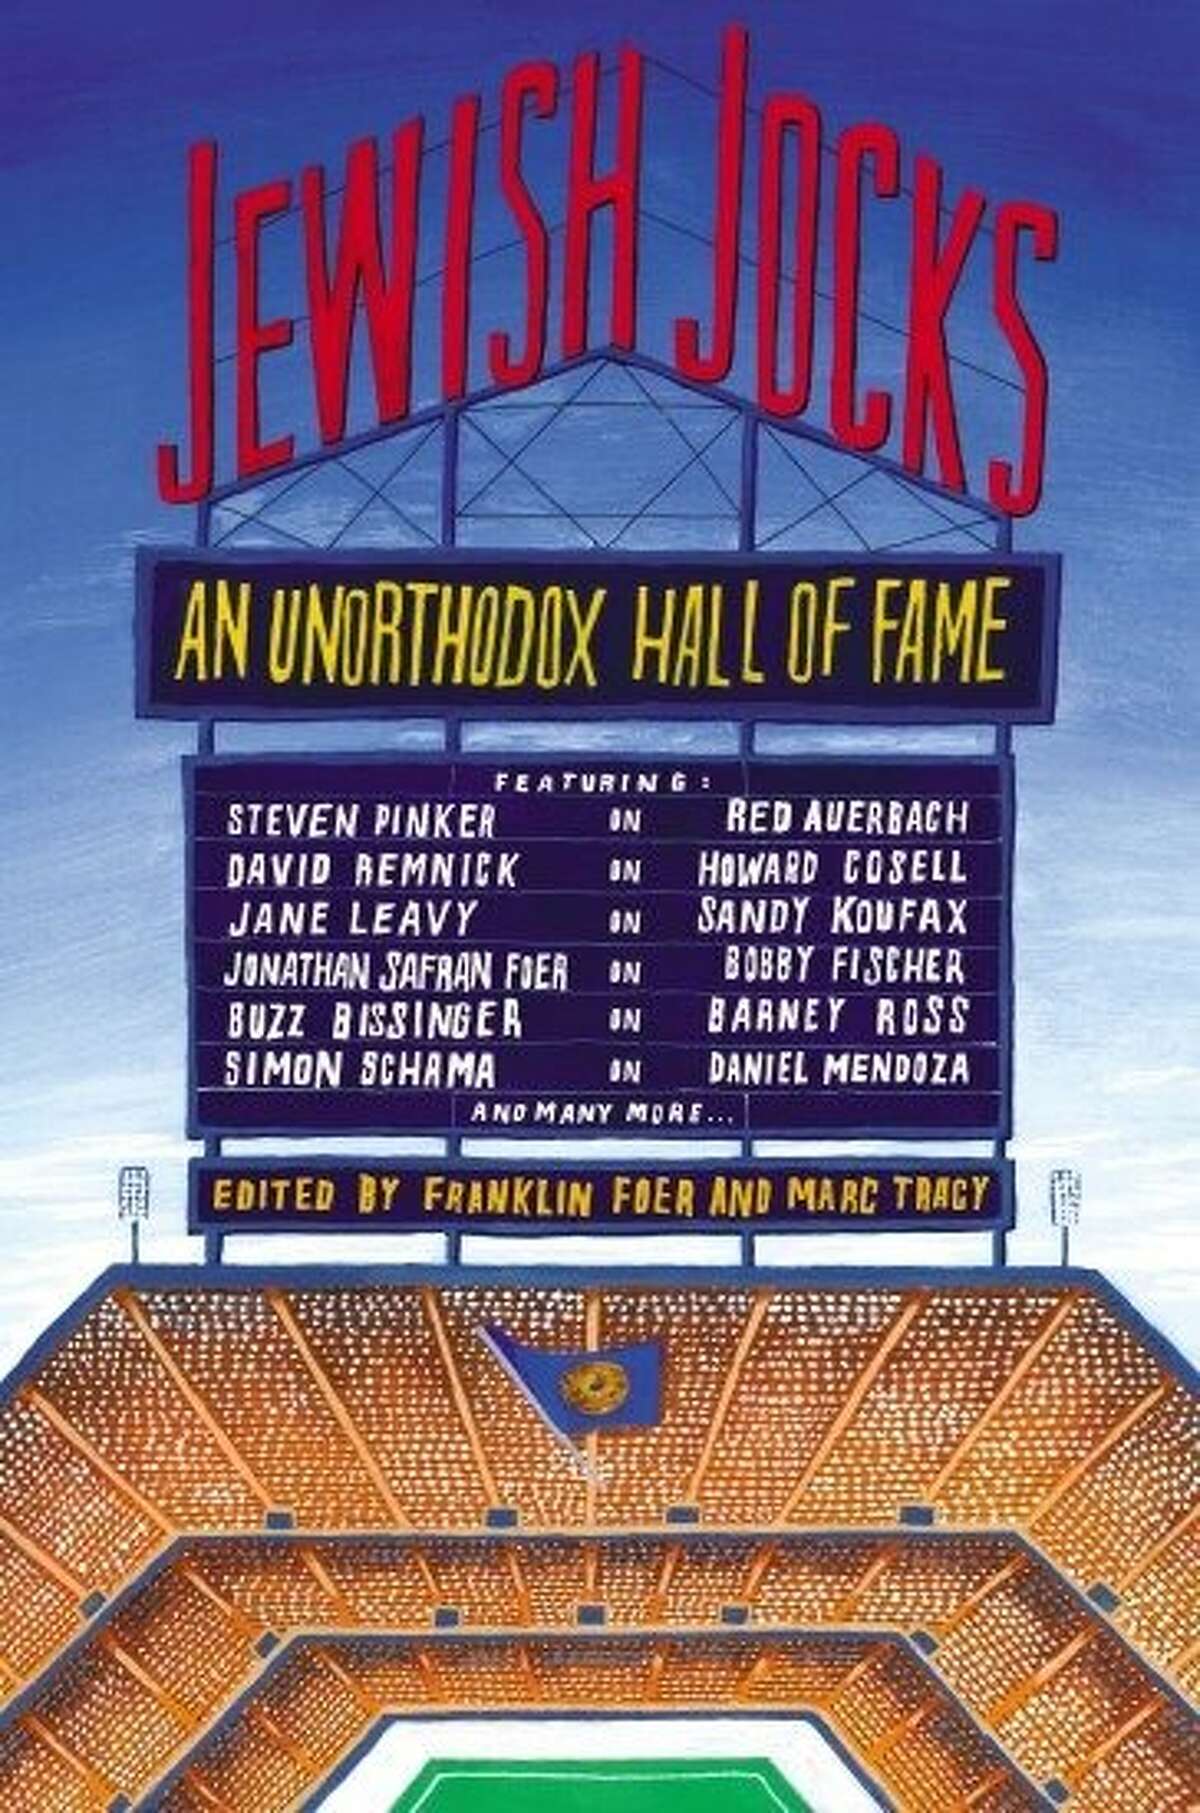 Jewish Jocks: An Unorthodox Hall of Fame, edited by Franklin Foer and Marc Tracy